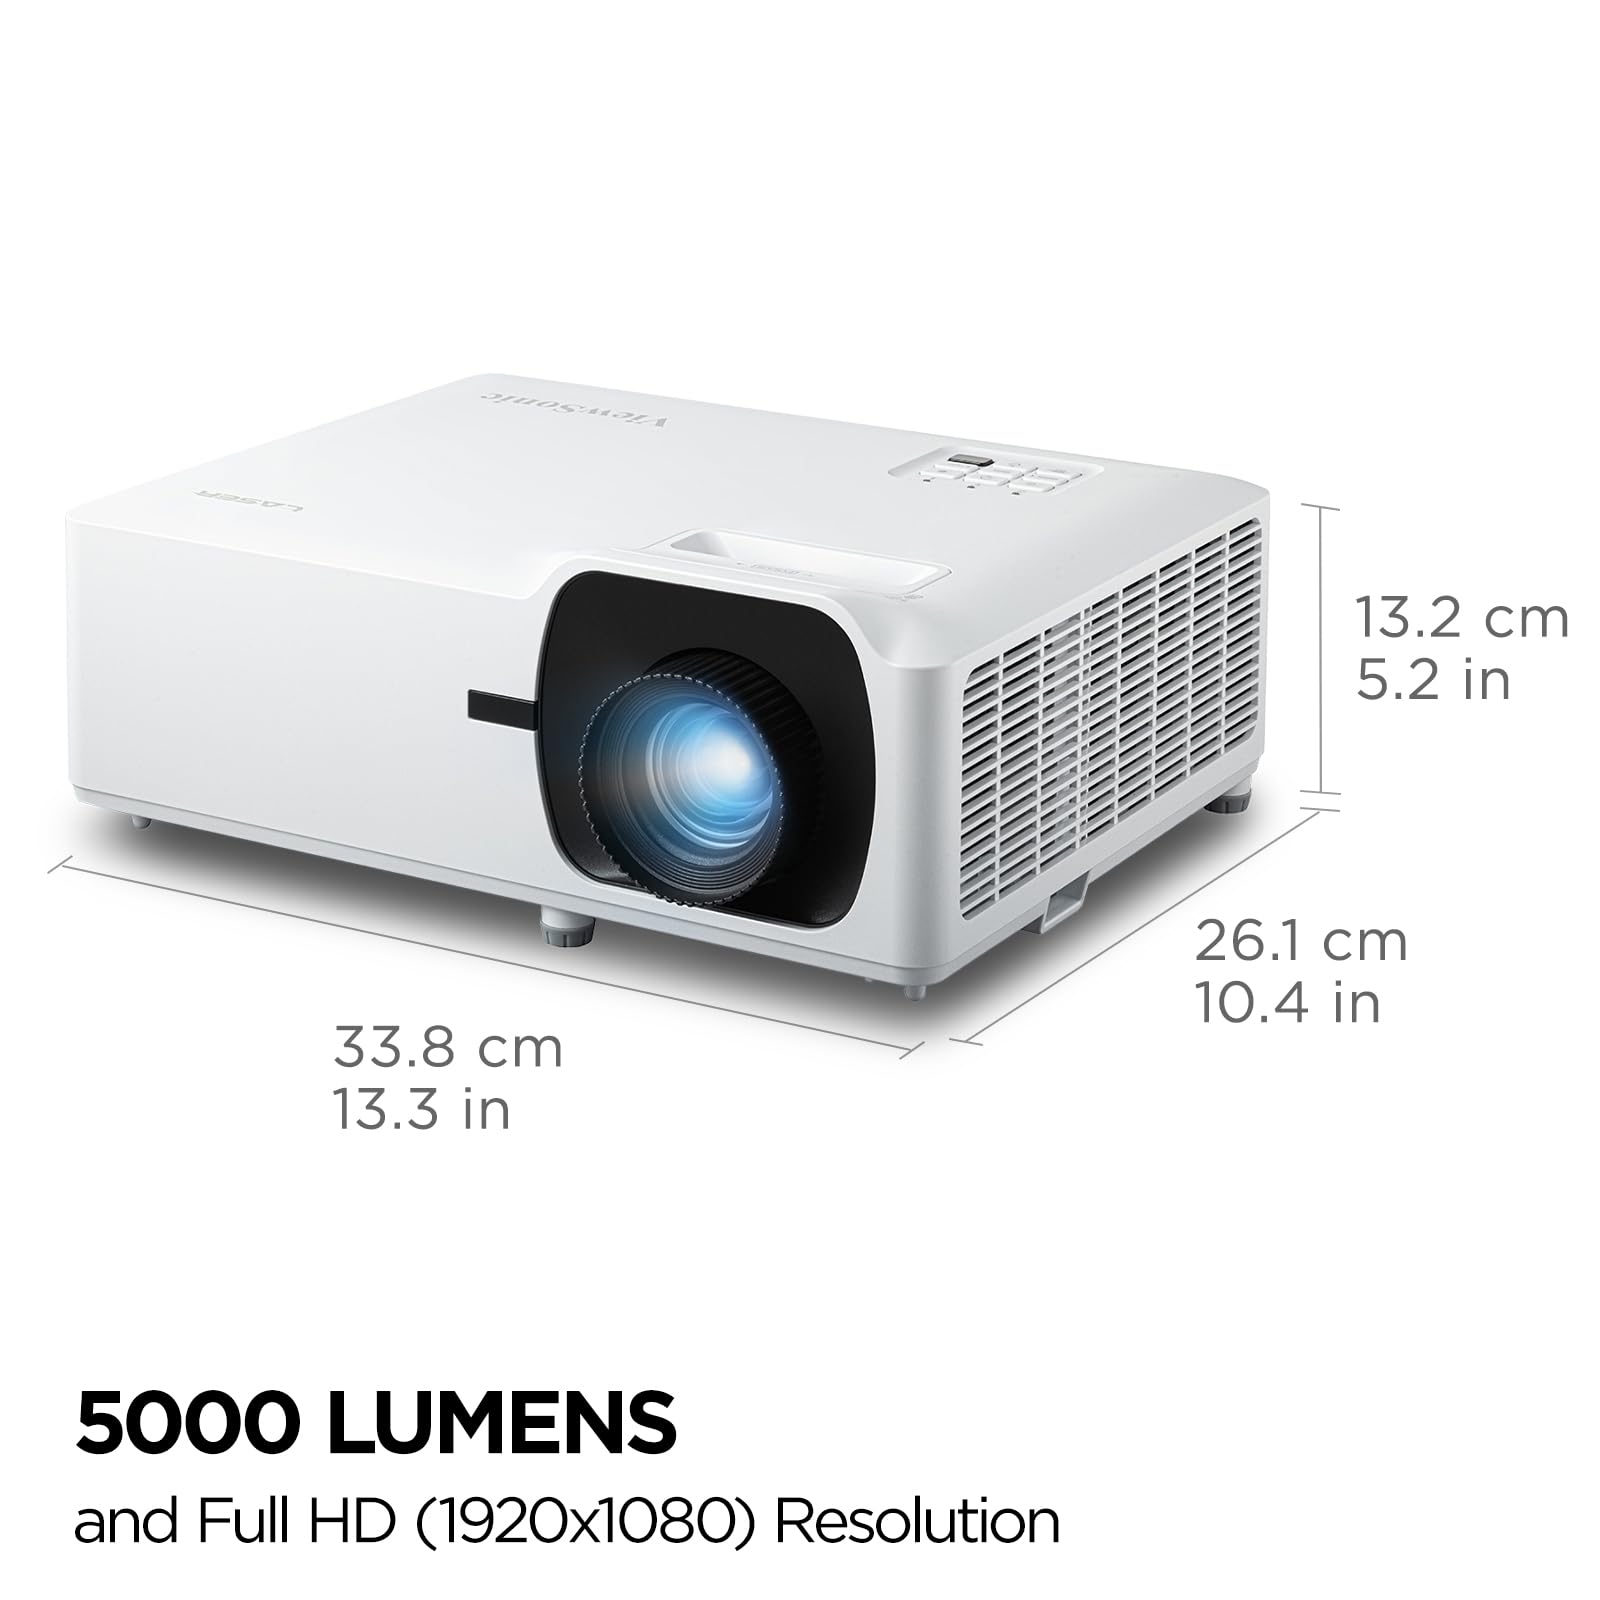 ViewSonic LS751HD 5000 Lumens 1080p Laser Projector w/ 1.6x Optical Zoom and H/V Keystone for Business and Education